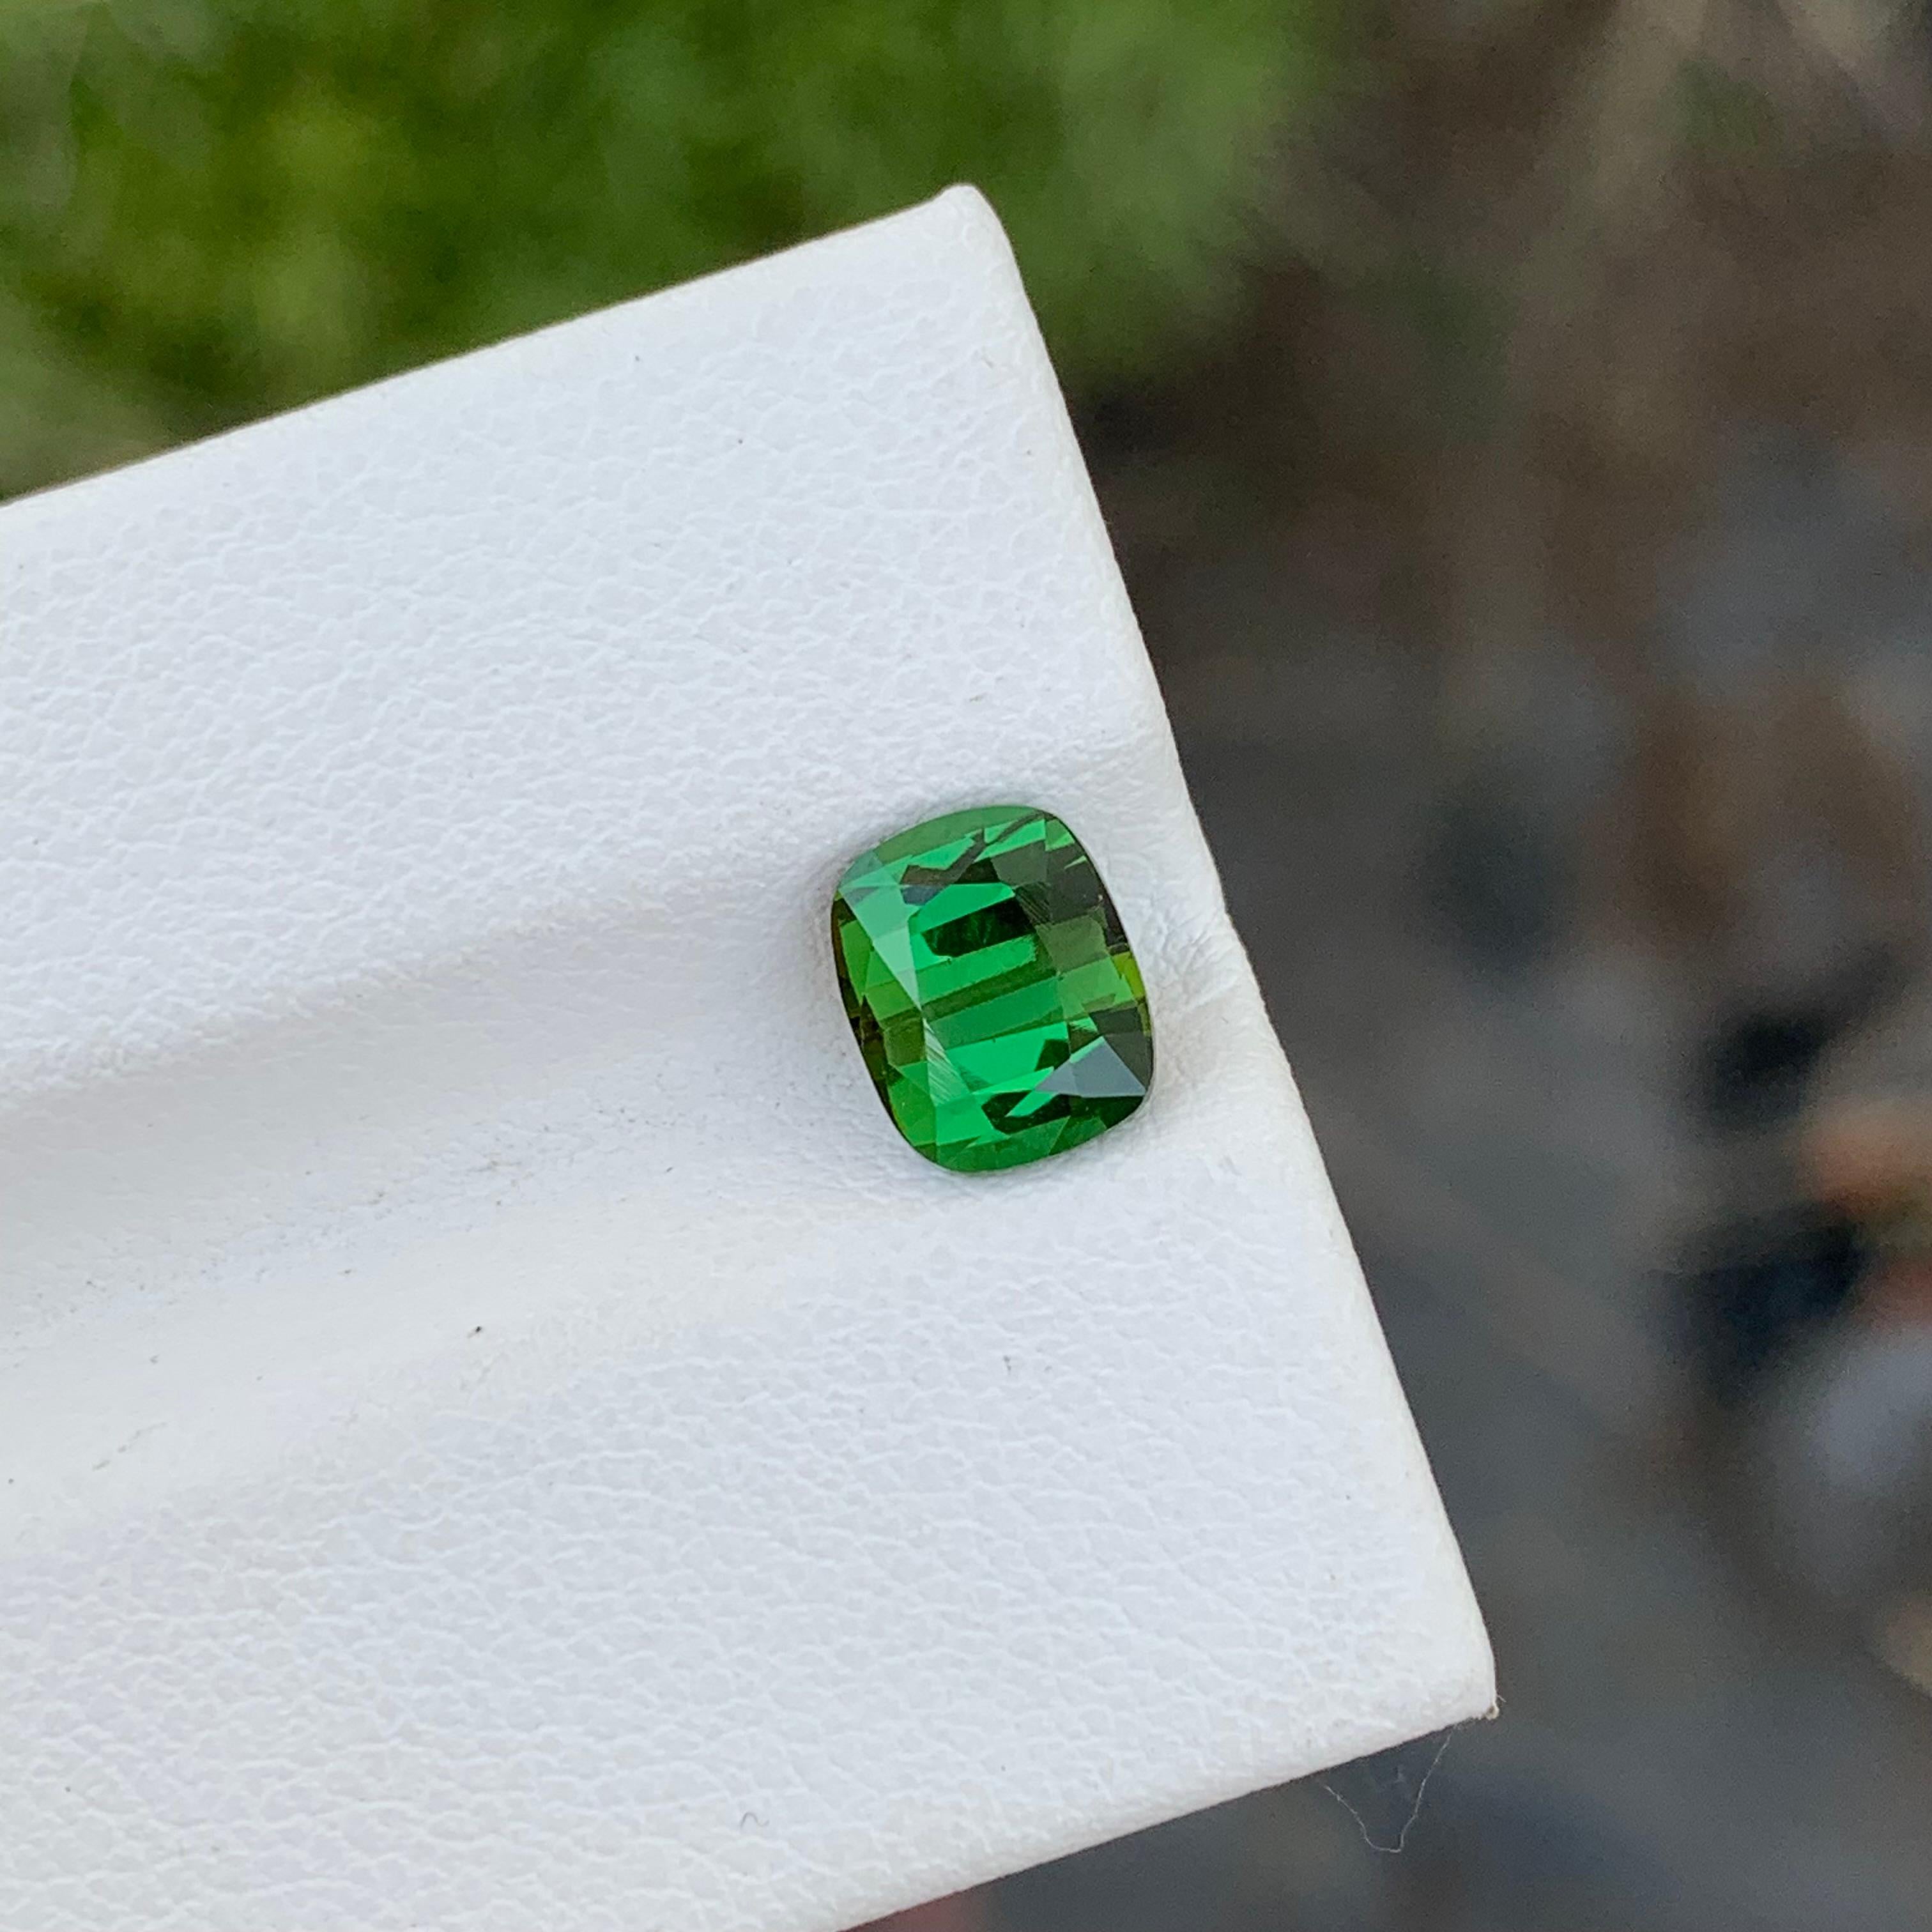 Loose Green Tourmaline
Weight: 1.75 Carats
Dimension: 6.1 x 7.6 x 4.7 Mm
Colour: Green
Origin: Afghanistan
Certificate: On Demand
Treatment: Non

Tourmaline is a captivating gemstone known for its remarkable variety of colors, making it a favorite